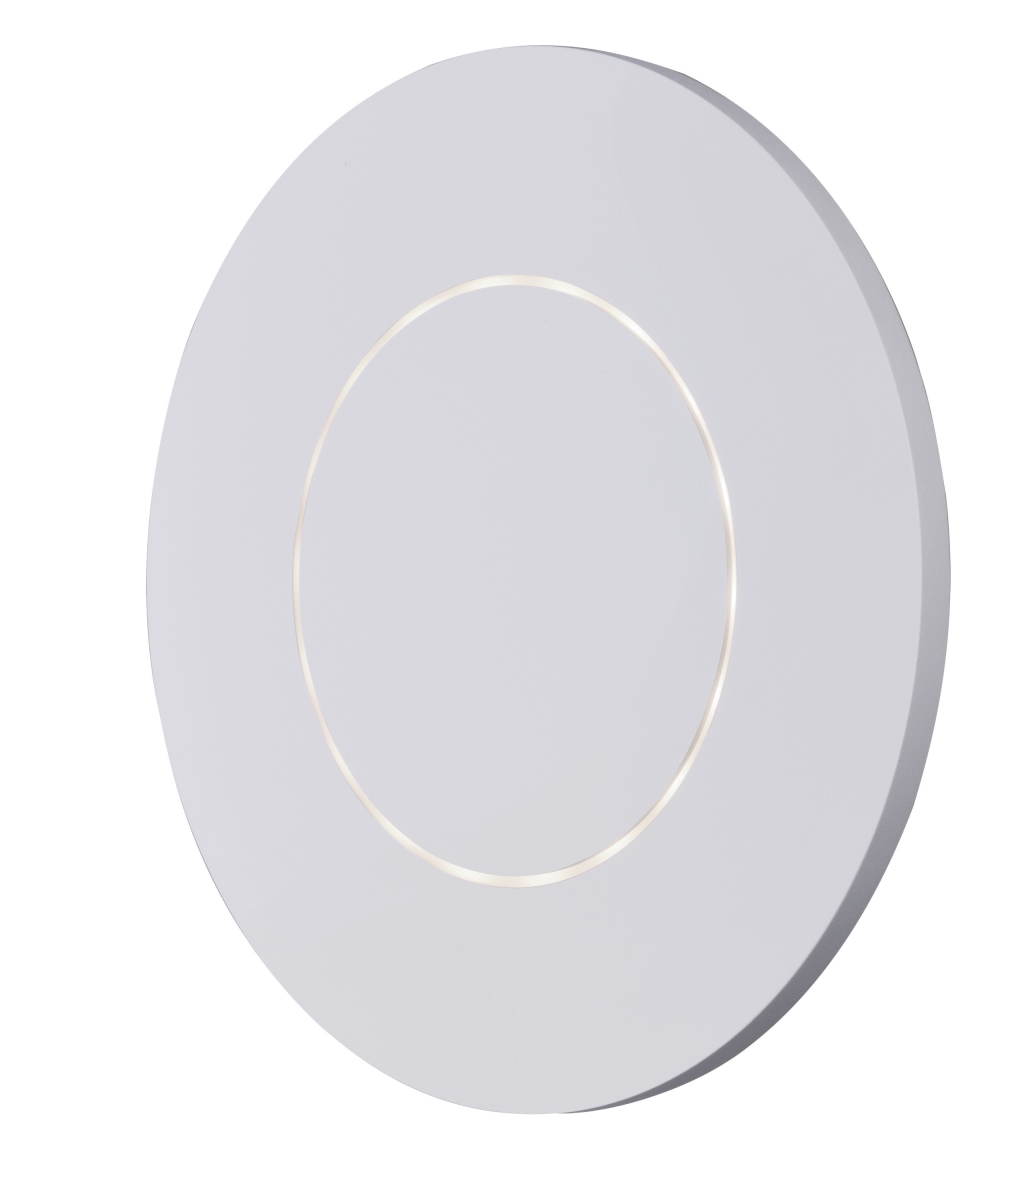 E41382-wt Alumilux Led Outdoor Wall Sconce, White